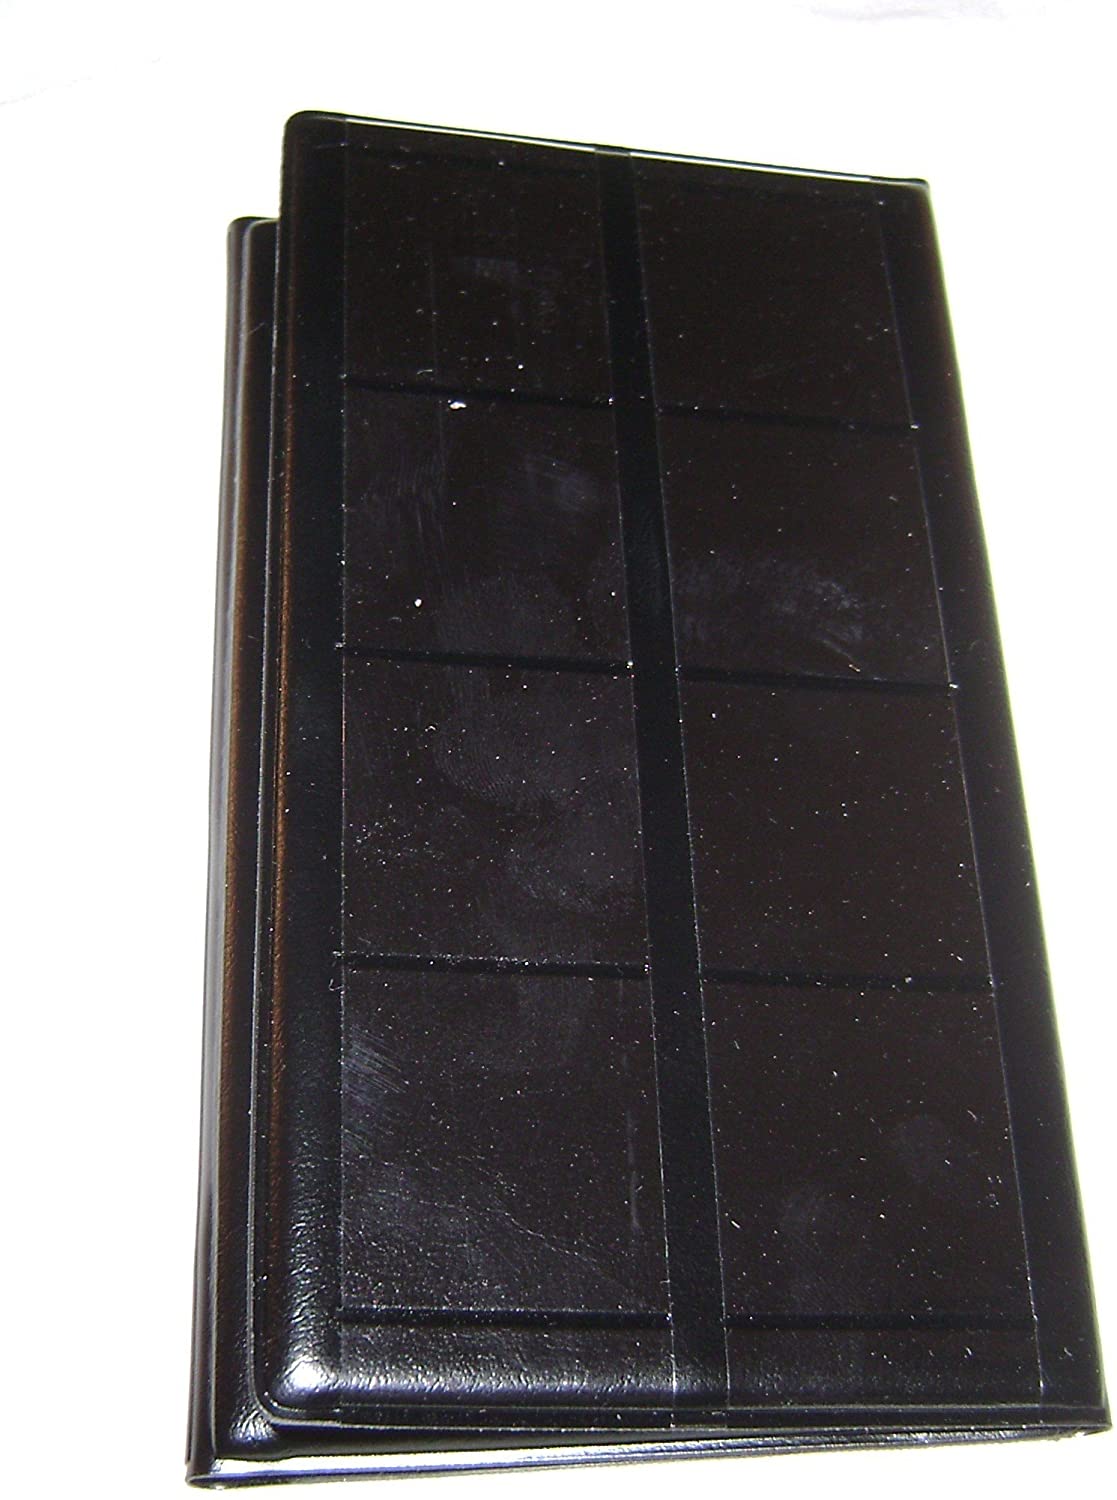 3 Penny Passport Souvenir Elongated Coin Albums With Free Pressed Pennies